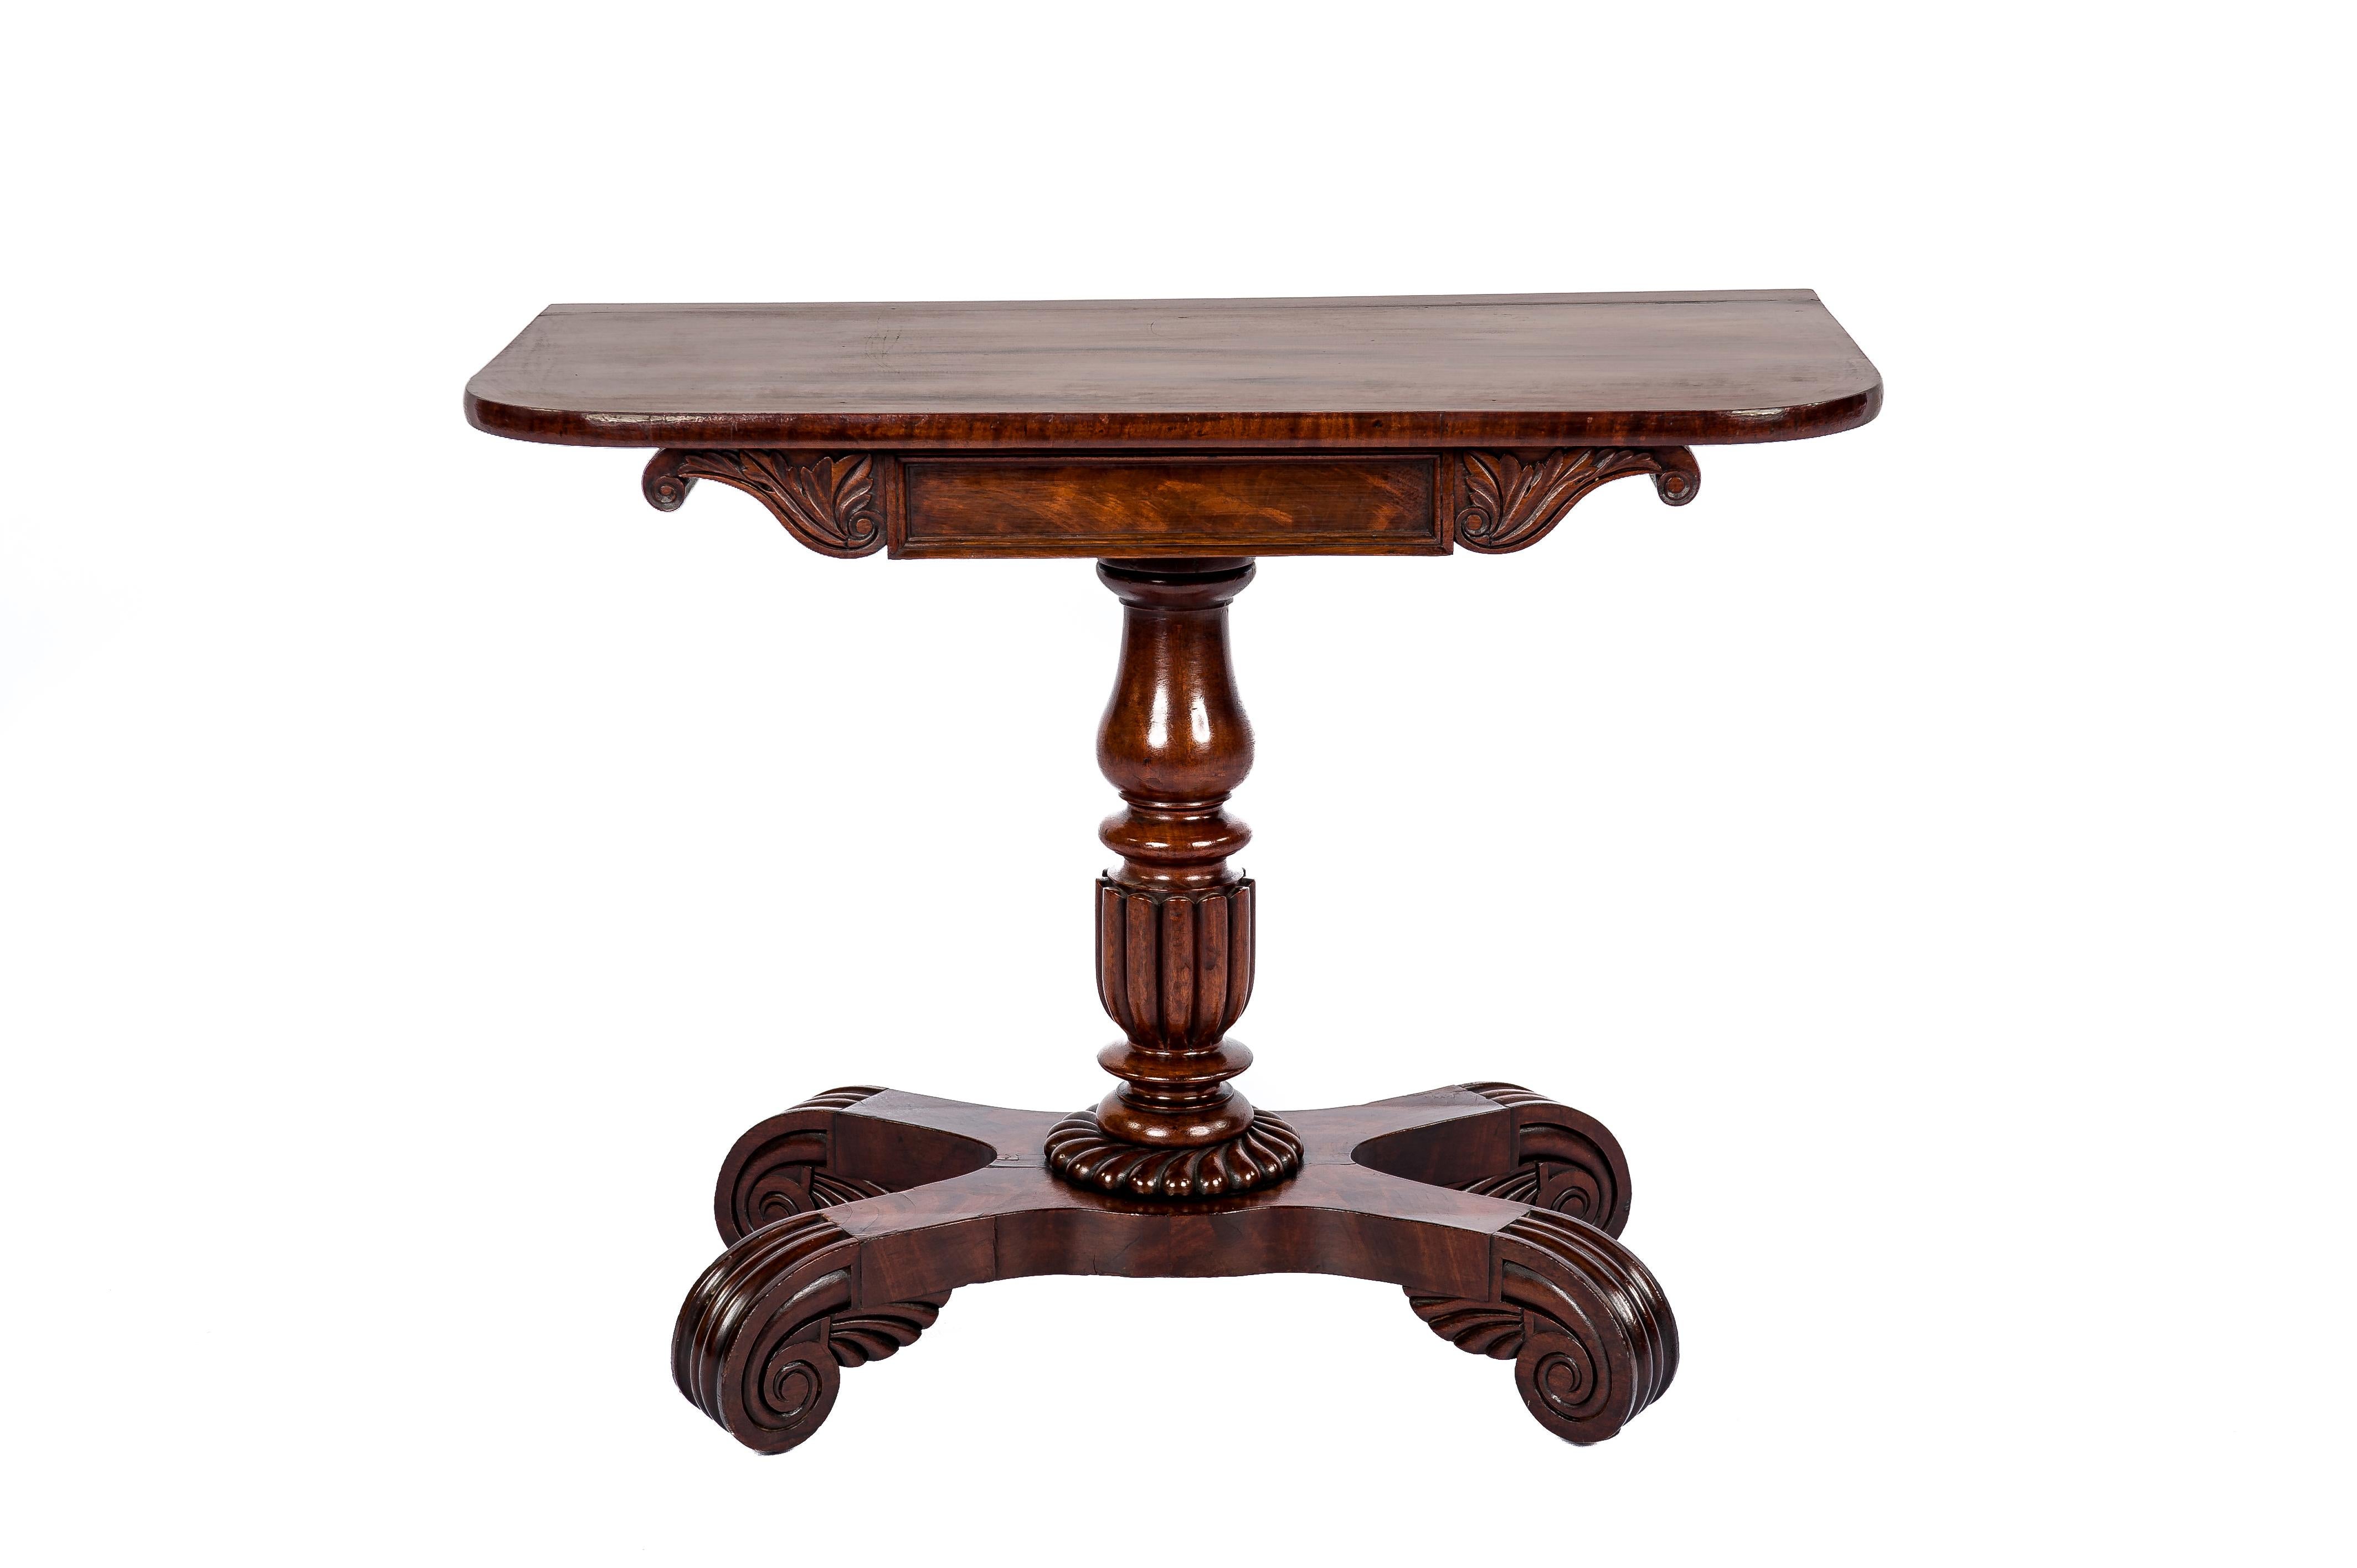 A beautiful English occasional or side table with a solid mahogany top that rests on a turned central baluster-shaped column. The central column ends in a quadriform platform with scrolled feet. The platform base is made of solid oak covered with